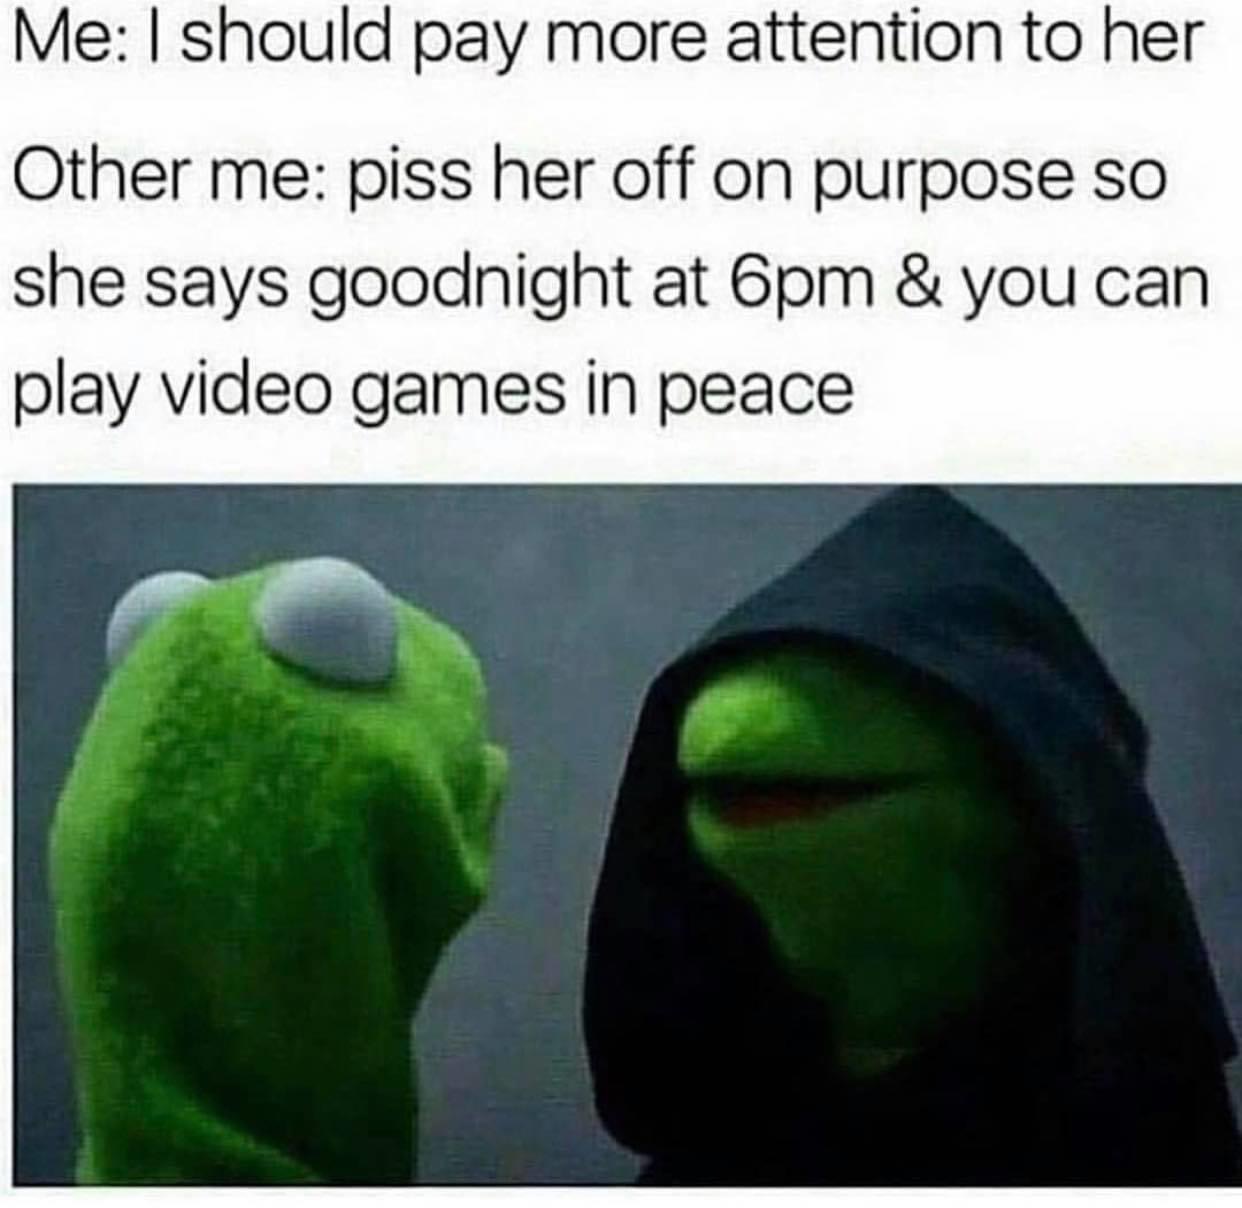 evil kermit meme - Me I should pay more attention to her Other me piss her off on purpose so she says goodnight at 6pm & you can play video games in peace